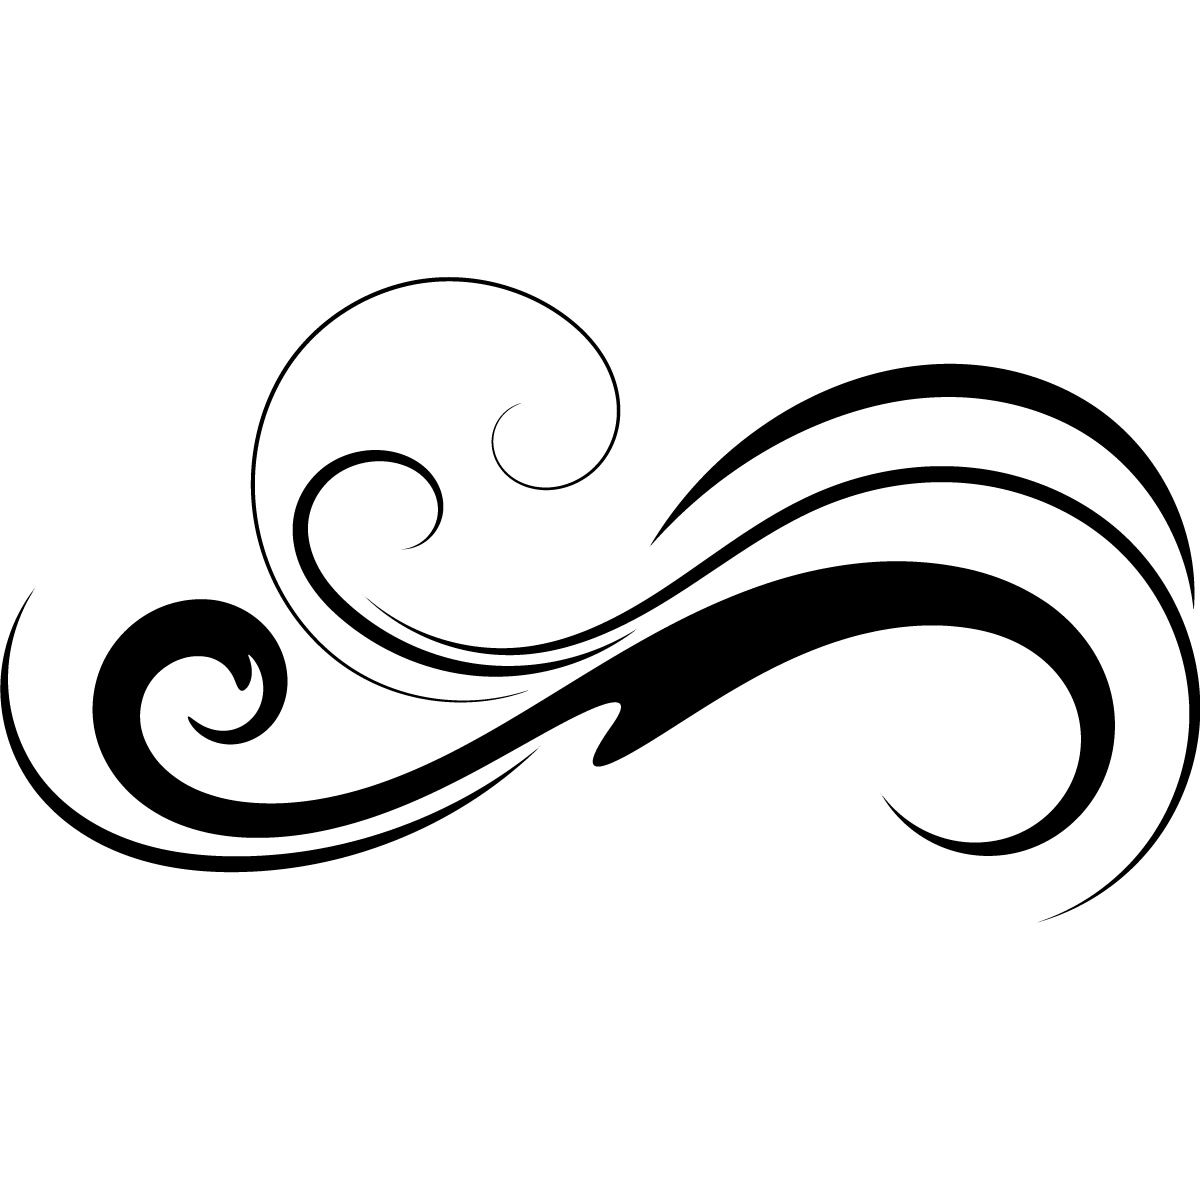 Line drawing of a. Waves clipart tribal